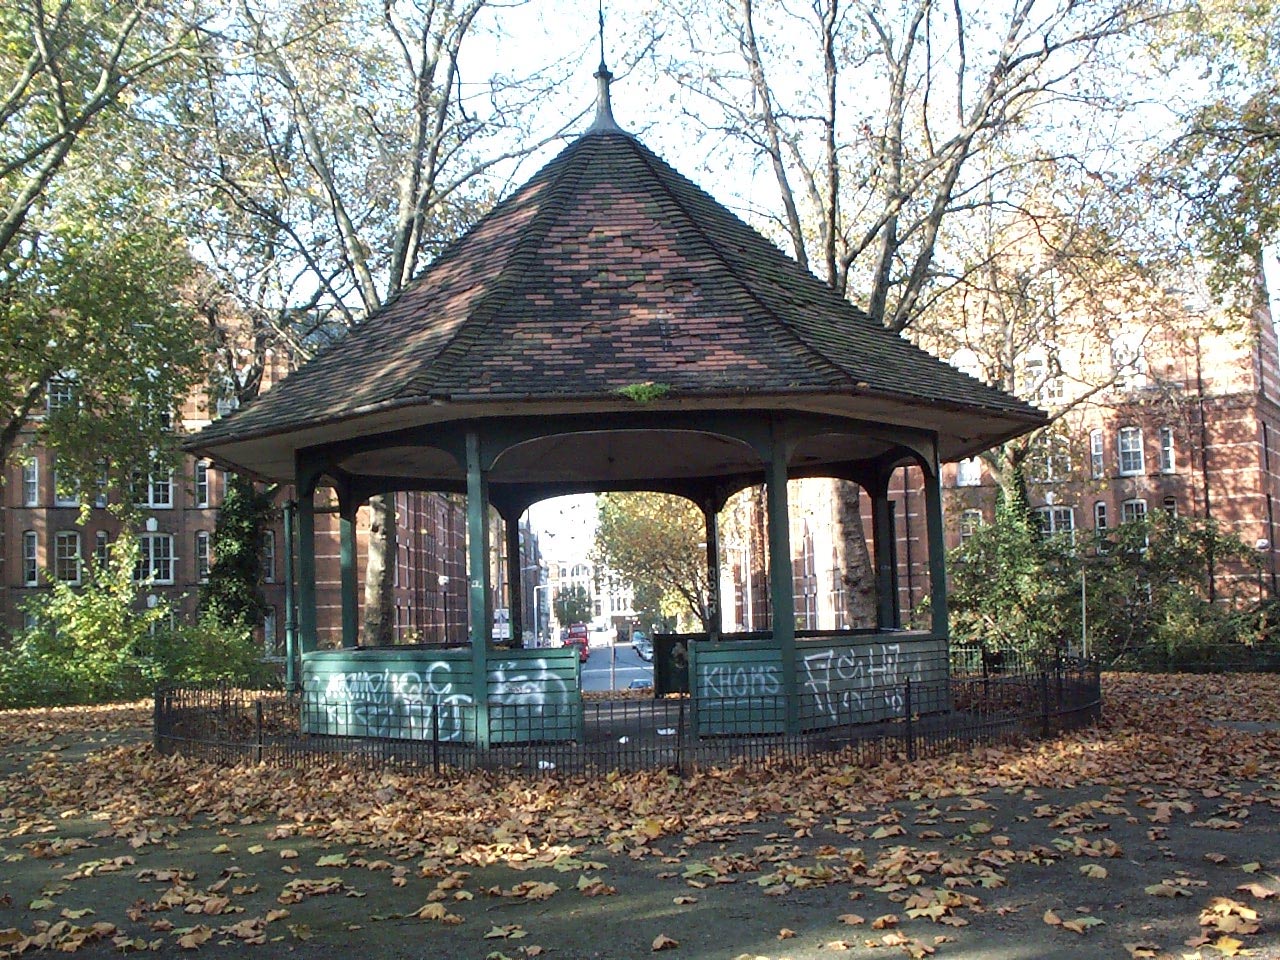 [The+bandstand.jpg]